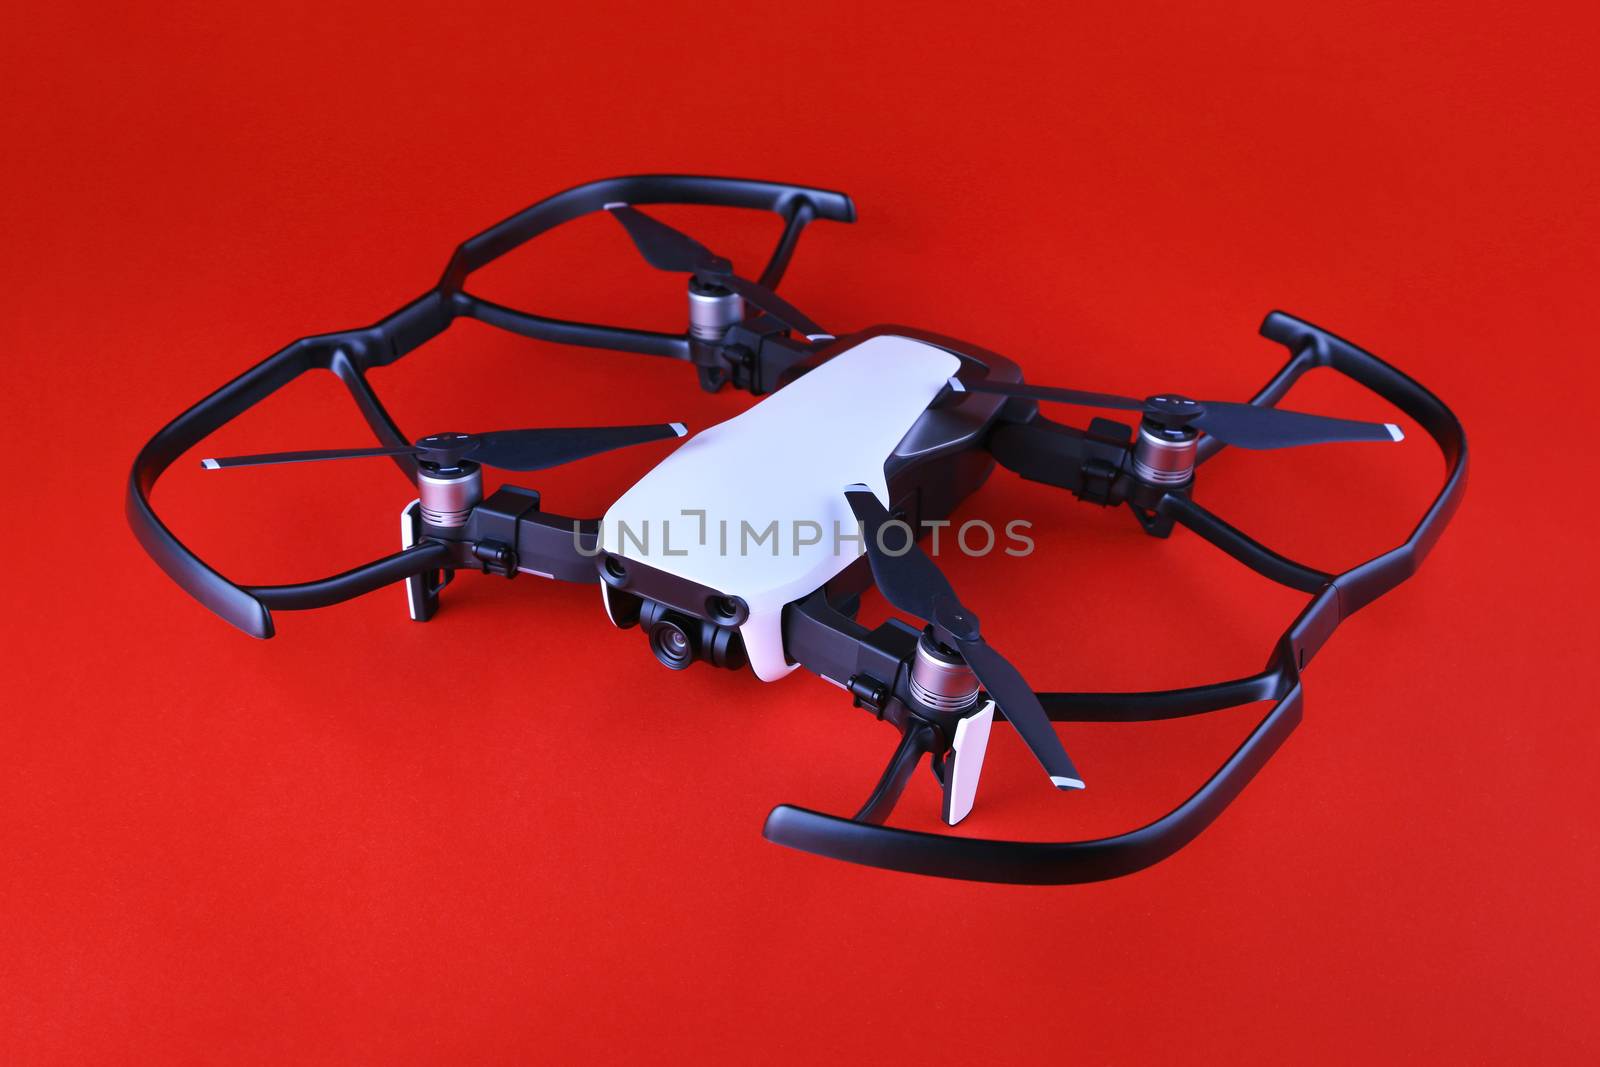 Uav drone copter isolated on white background, close-up. Small drone quadrocopter with propeller protection on a red background. Safe drone flight. Unmanned aerial vehicle on a red background.